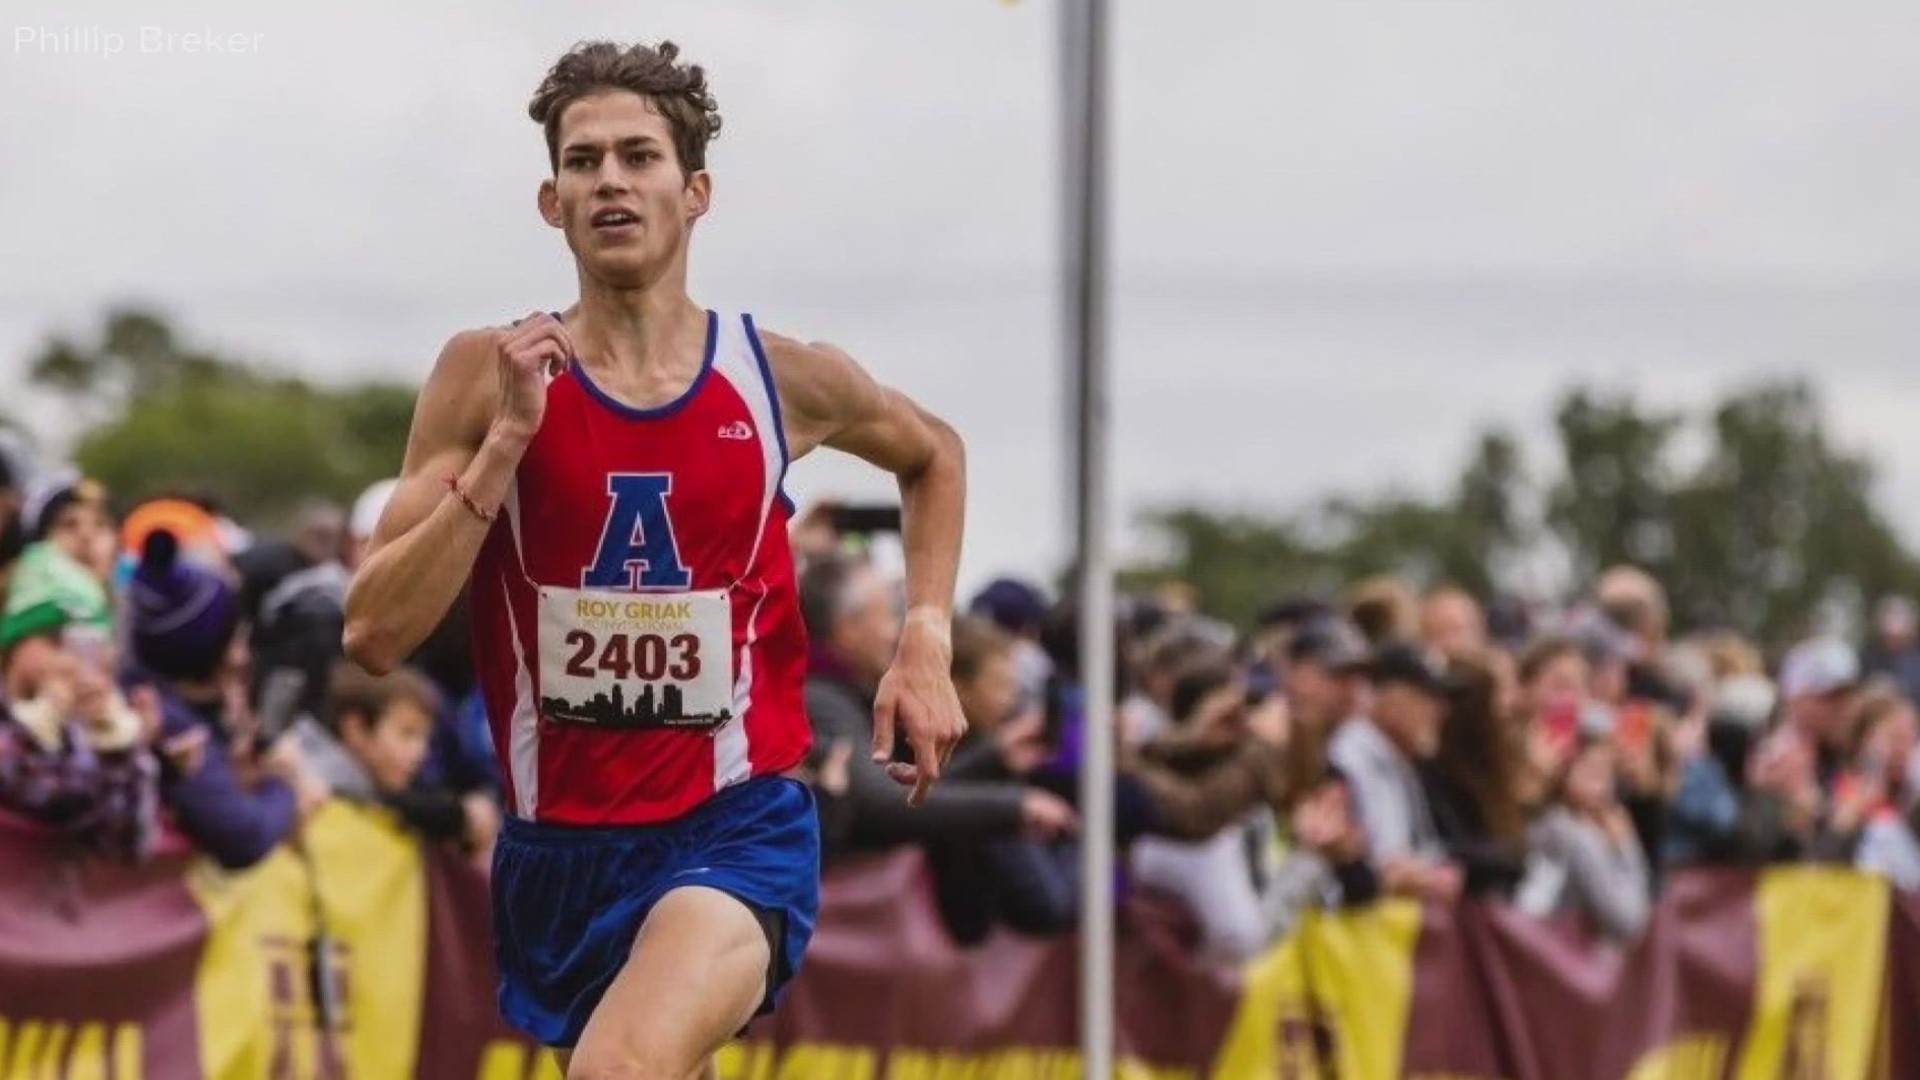 The Armstrong High School state champion runner will run at North Carolina this fall.